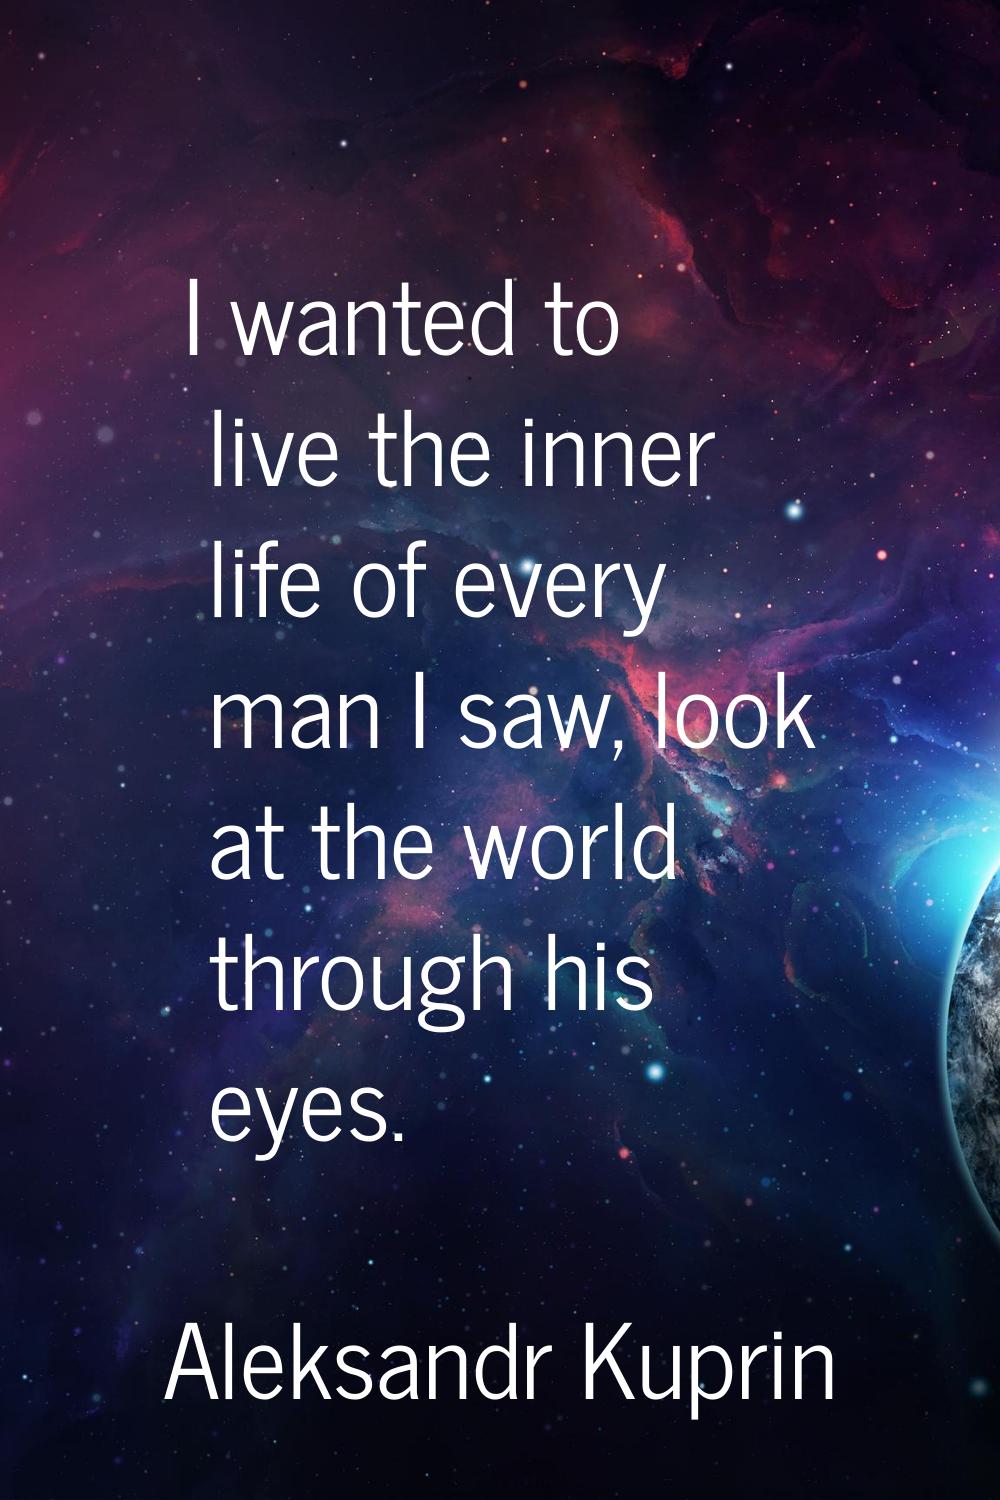 I wanted to live the inner life of every man I saw, look at the world through his eyes.